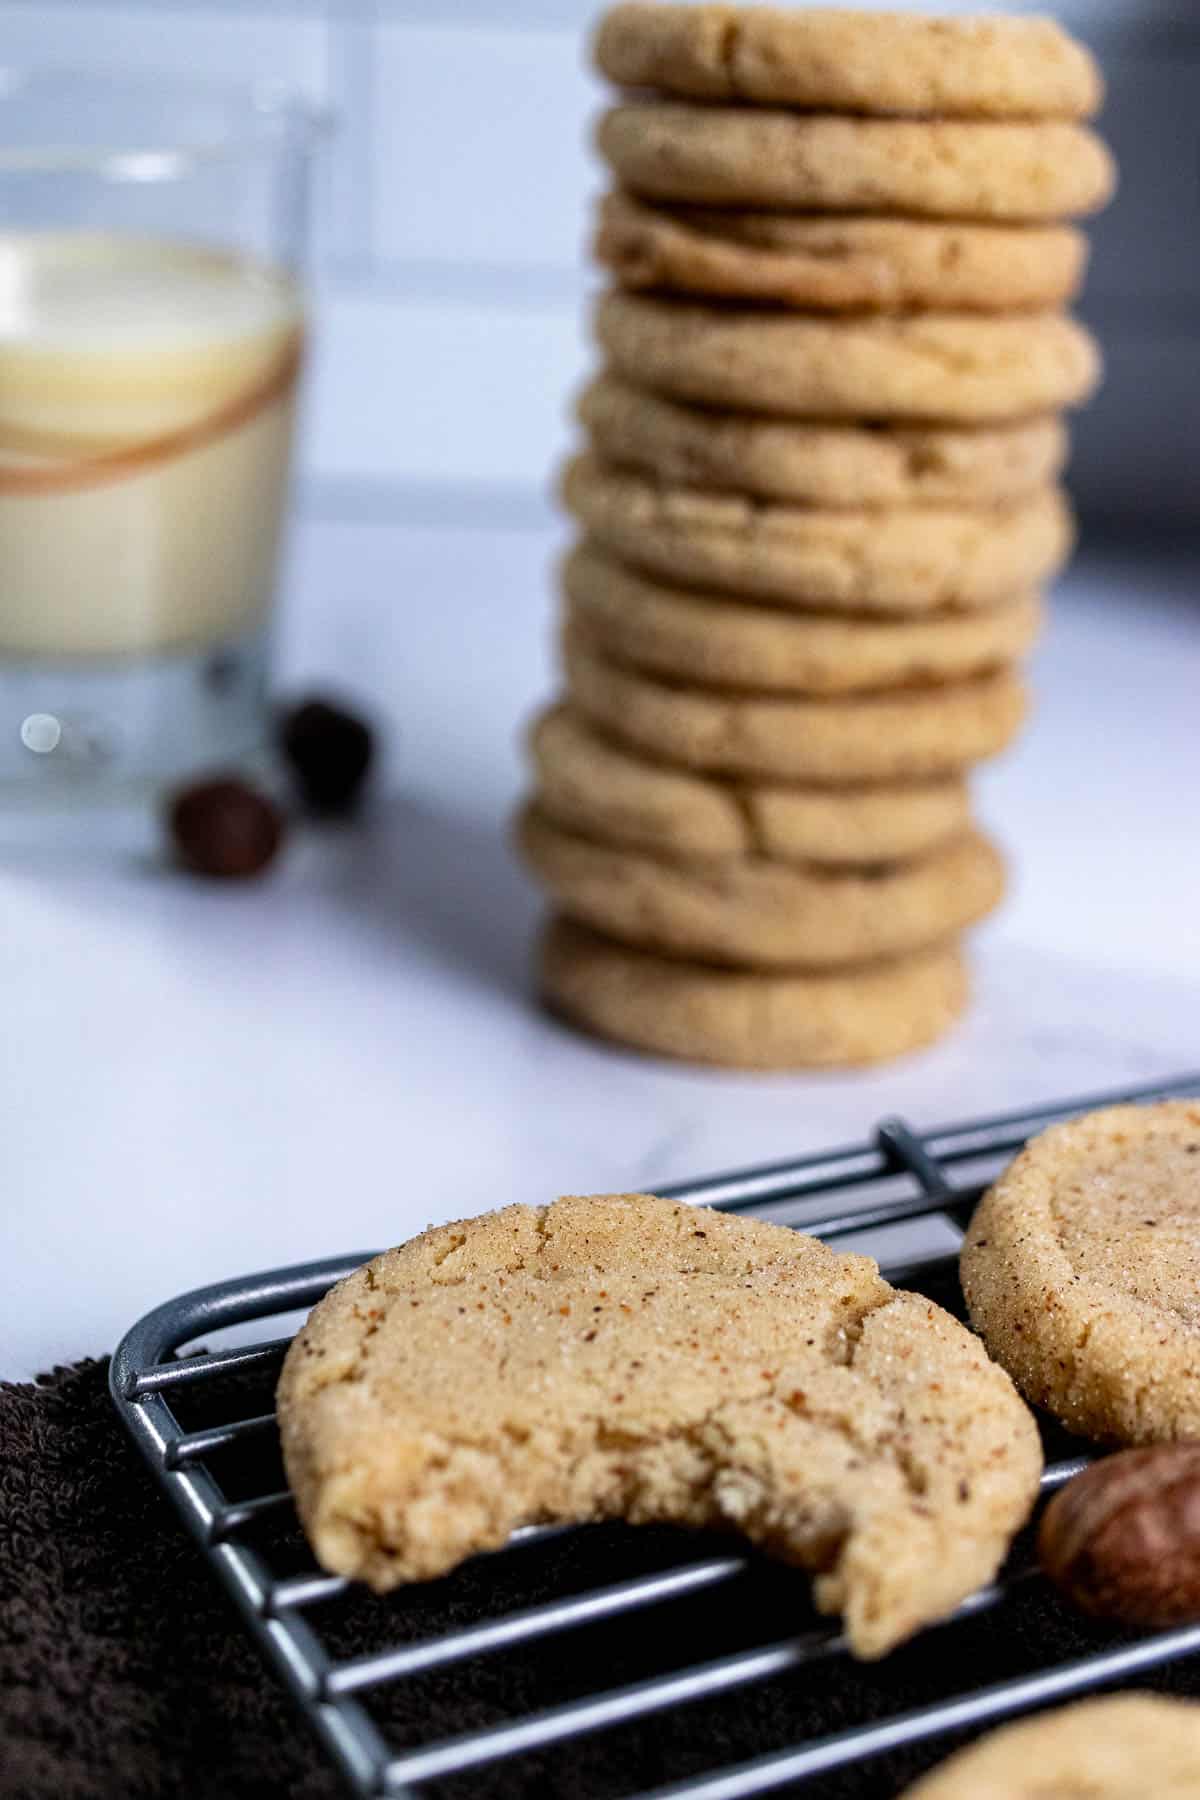 Close up of an eggnog snickerdoodle with a bite taken out of it and a stack of more cookies in the background.